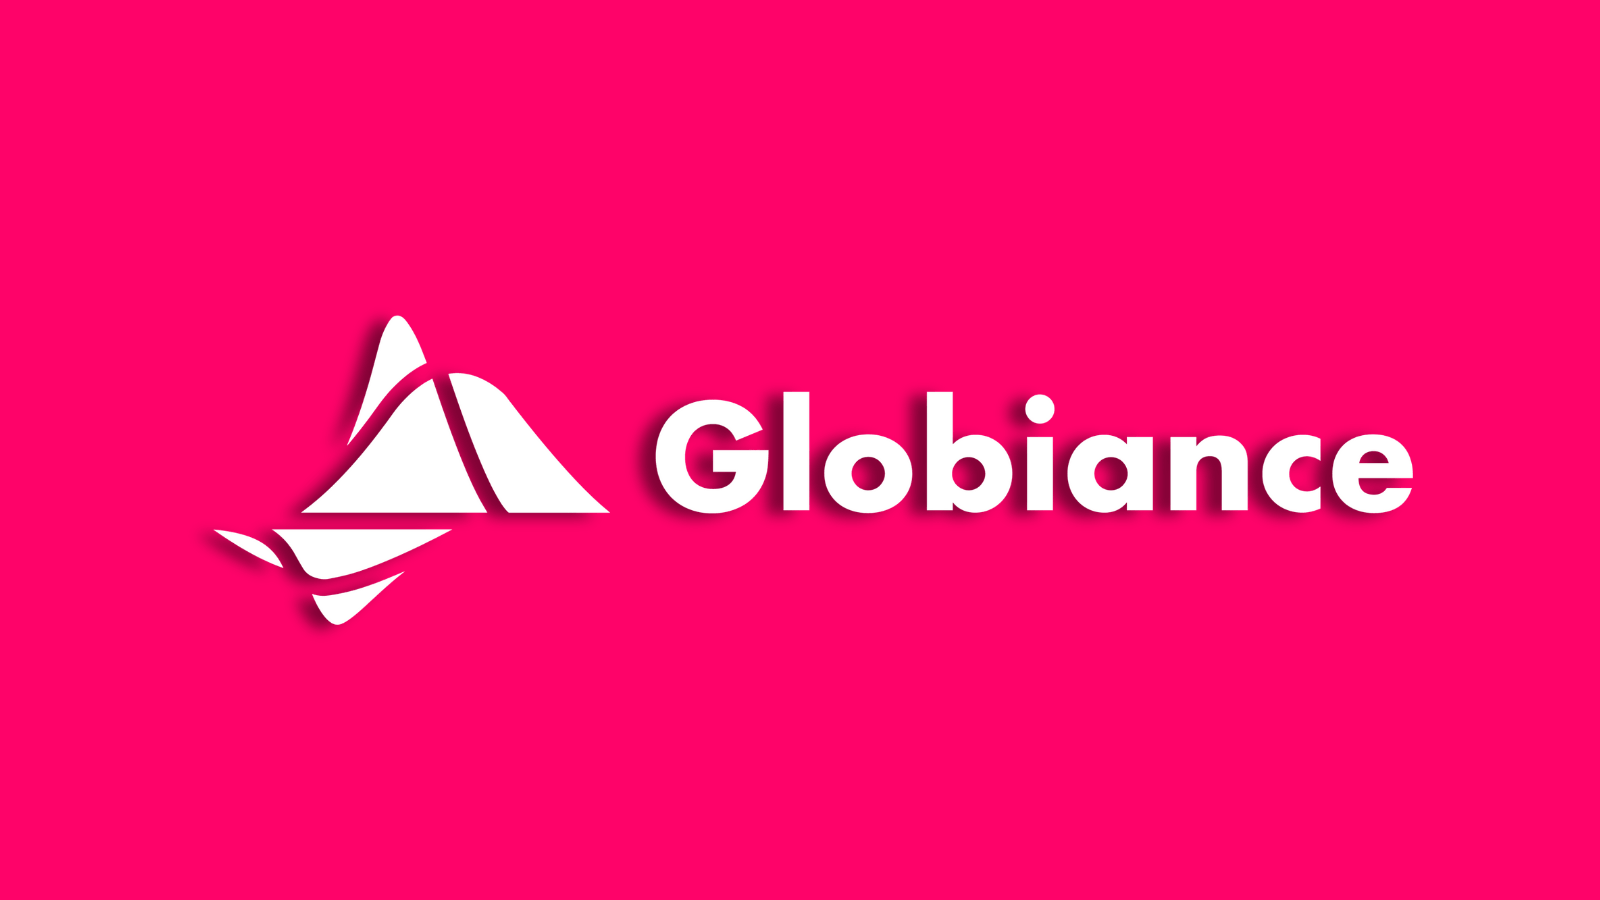 Globiance: Setting the Gold Standard for Next-Gen Banking